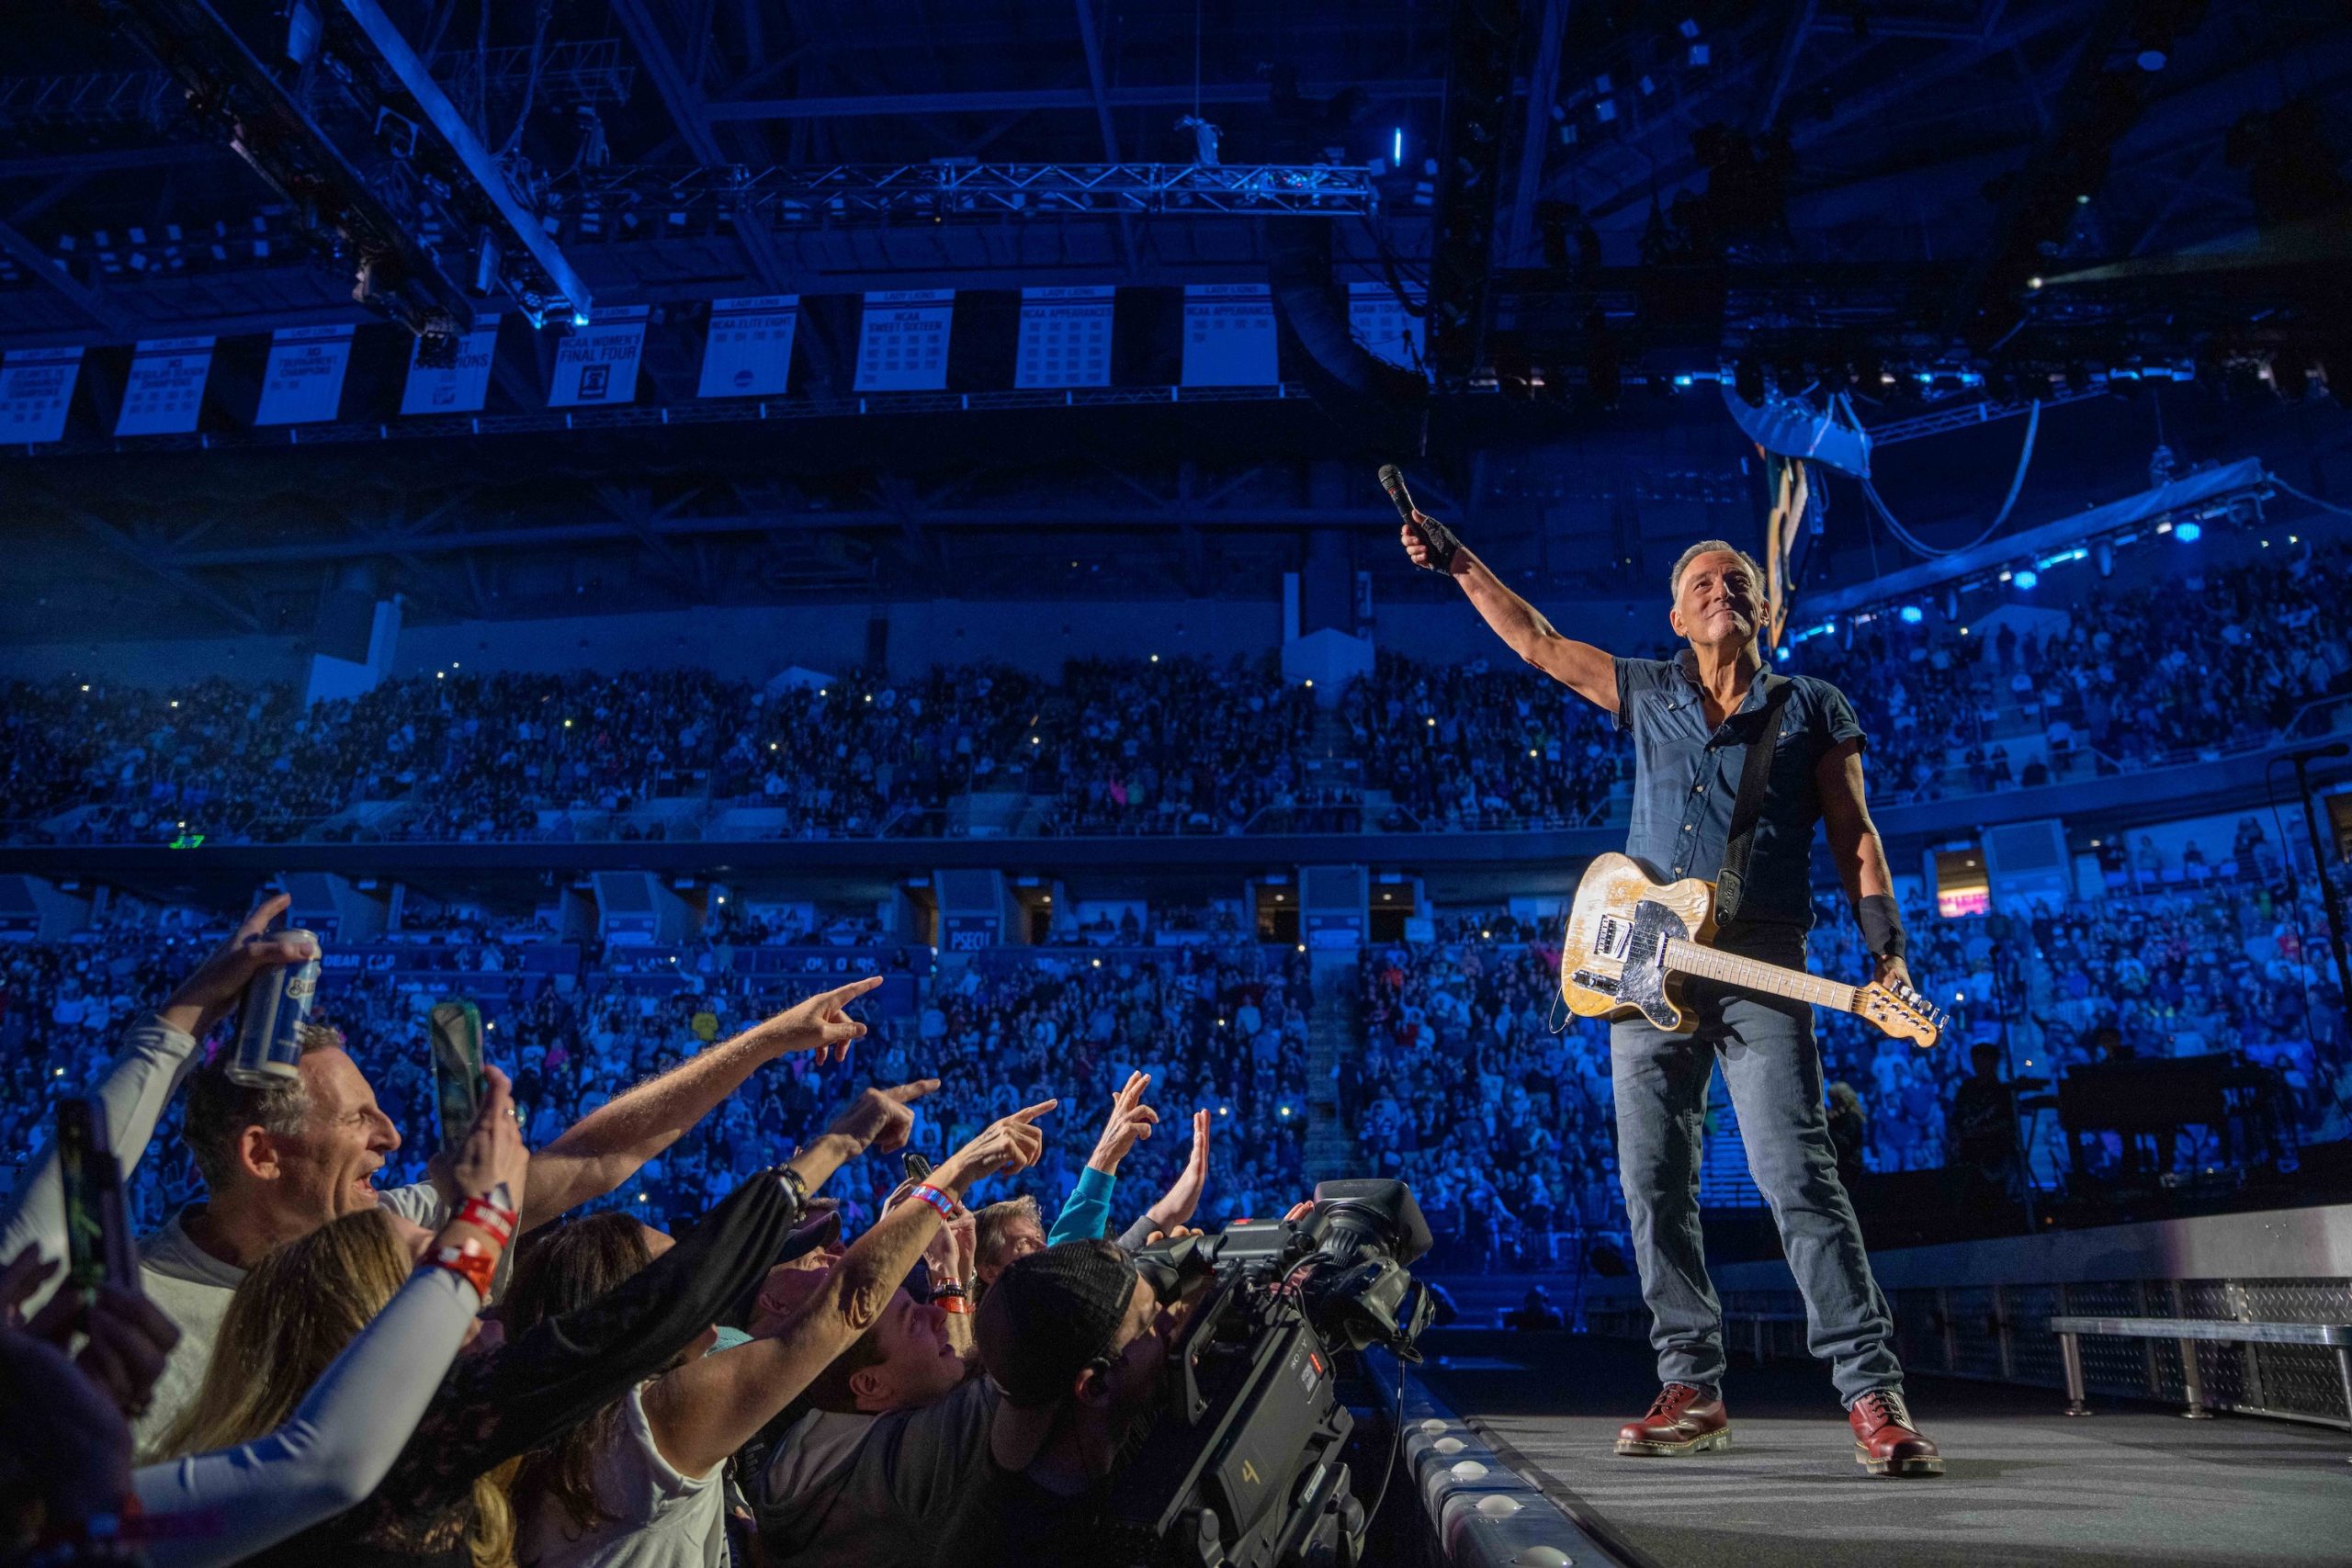 Bruce Springsteen & E Street Band at Bryce Jordan Center, State College, Pennsylvania on March 18, 2023.